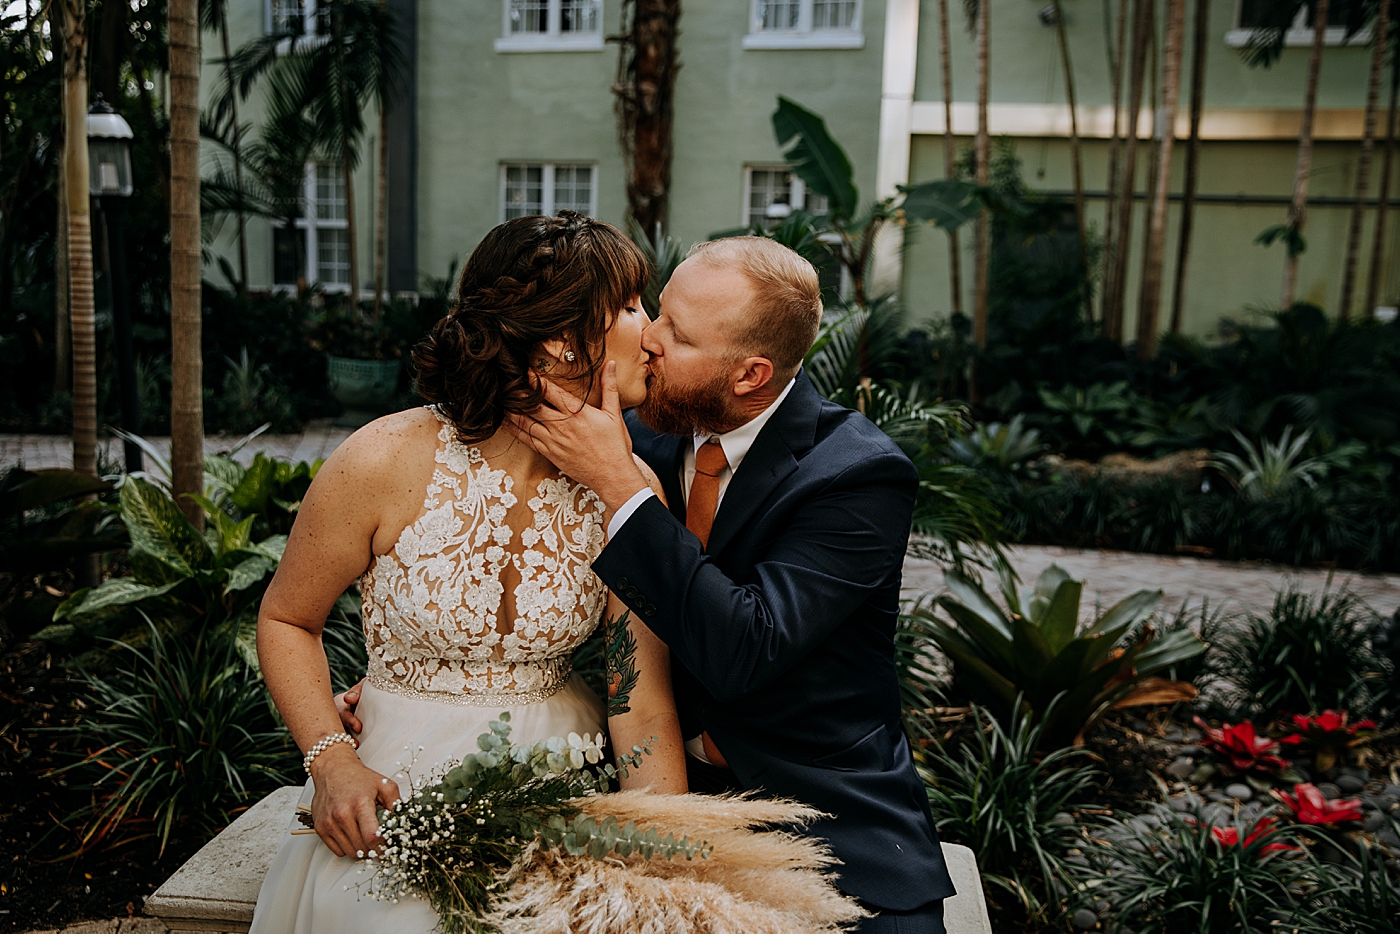 Bride and Groom sitting and kissing each other Historic Stranahan House Wedding Photography captured by South Florida Wedding Photographer Maggie Alvarez Photography